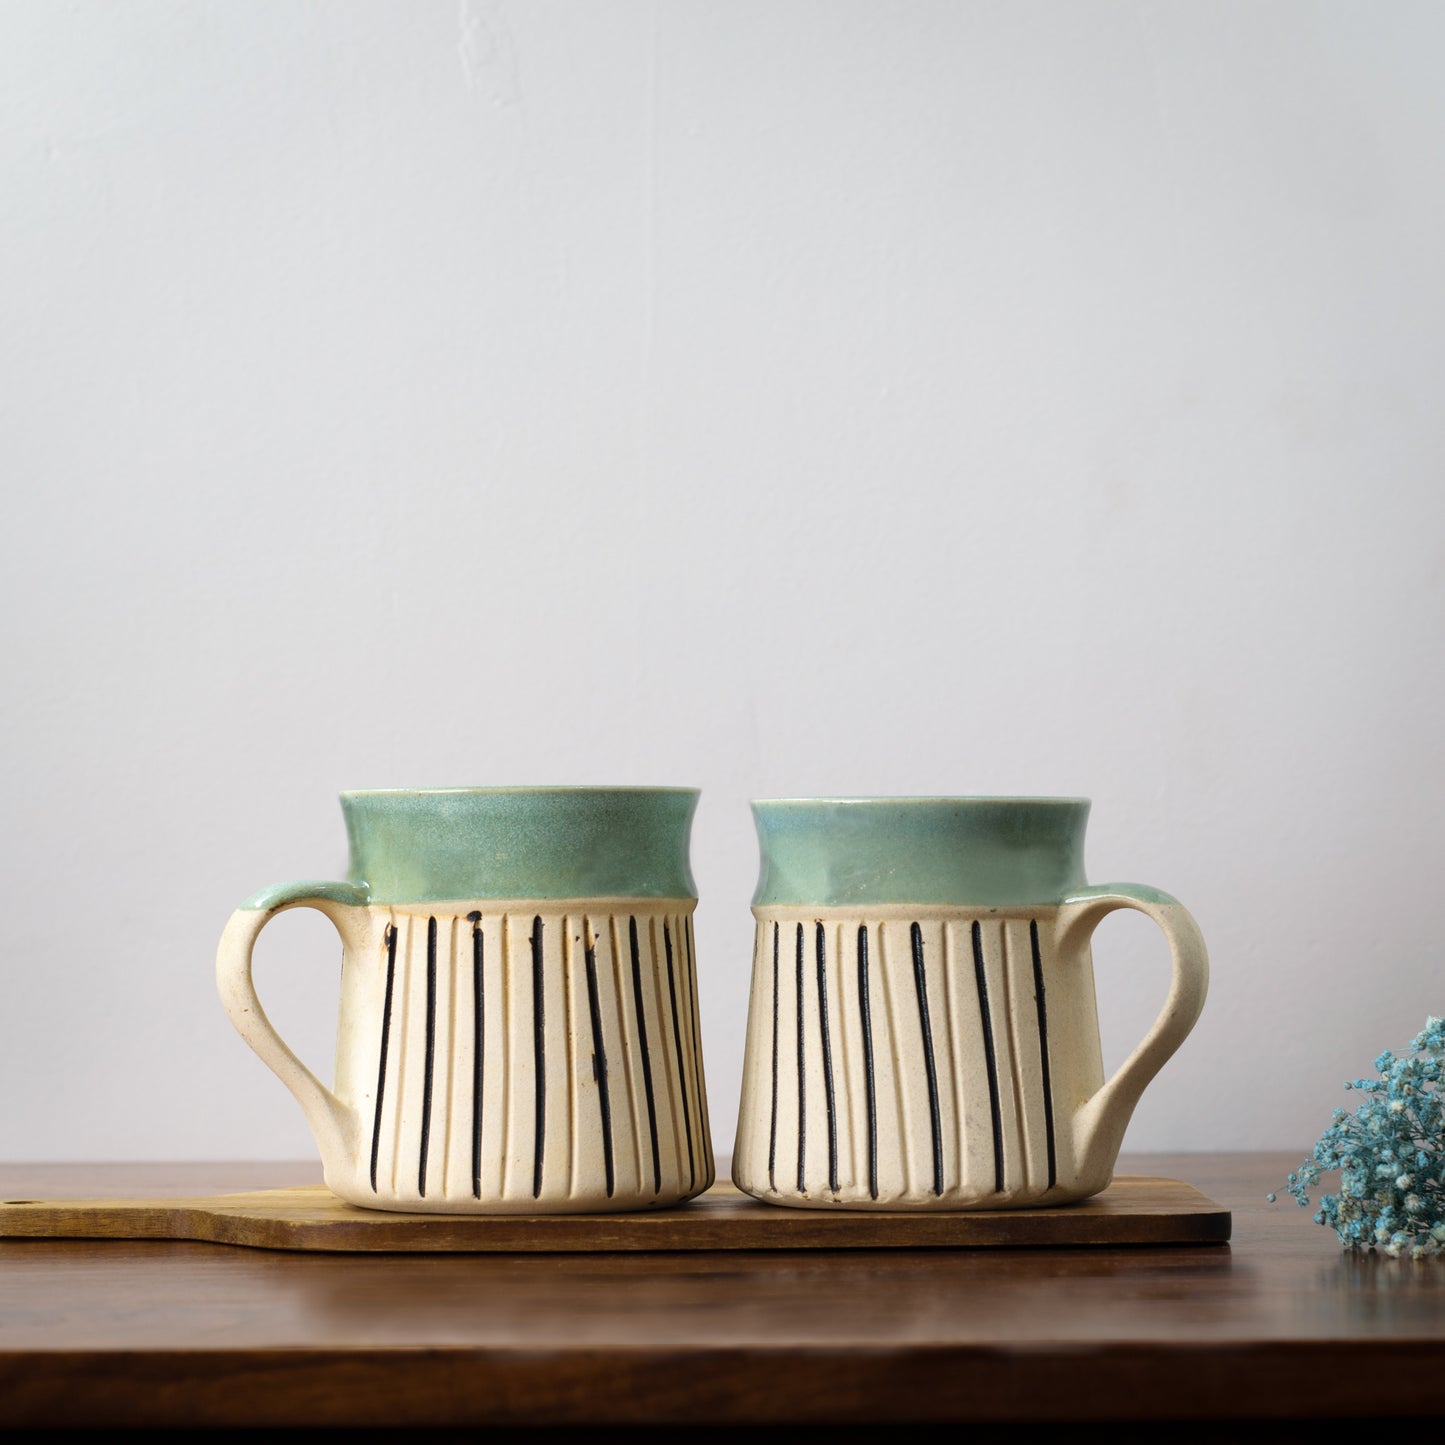 Pair of ceramic mugs with handle: light blue top rim, white stoneware finish with black stripes, on wooden slab with blue dried flowers. Buy designer tableware Bangalore.